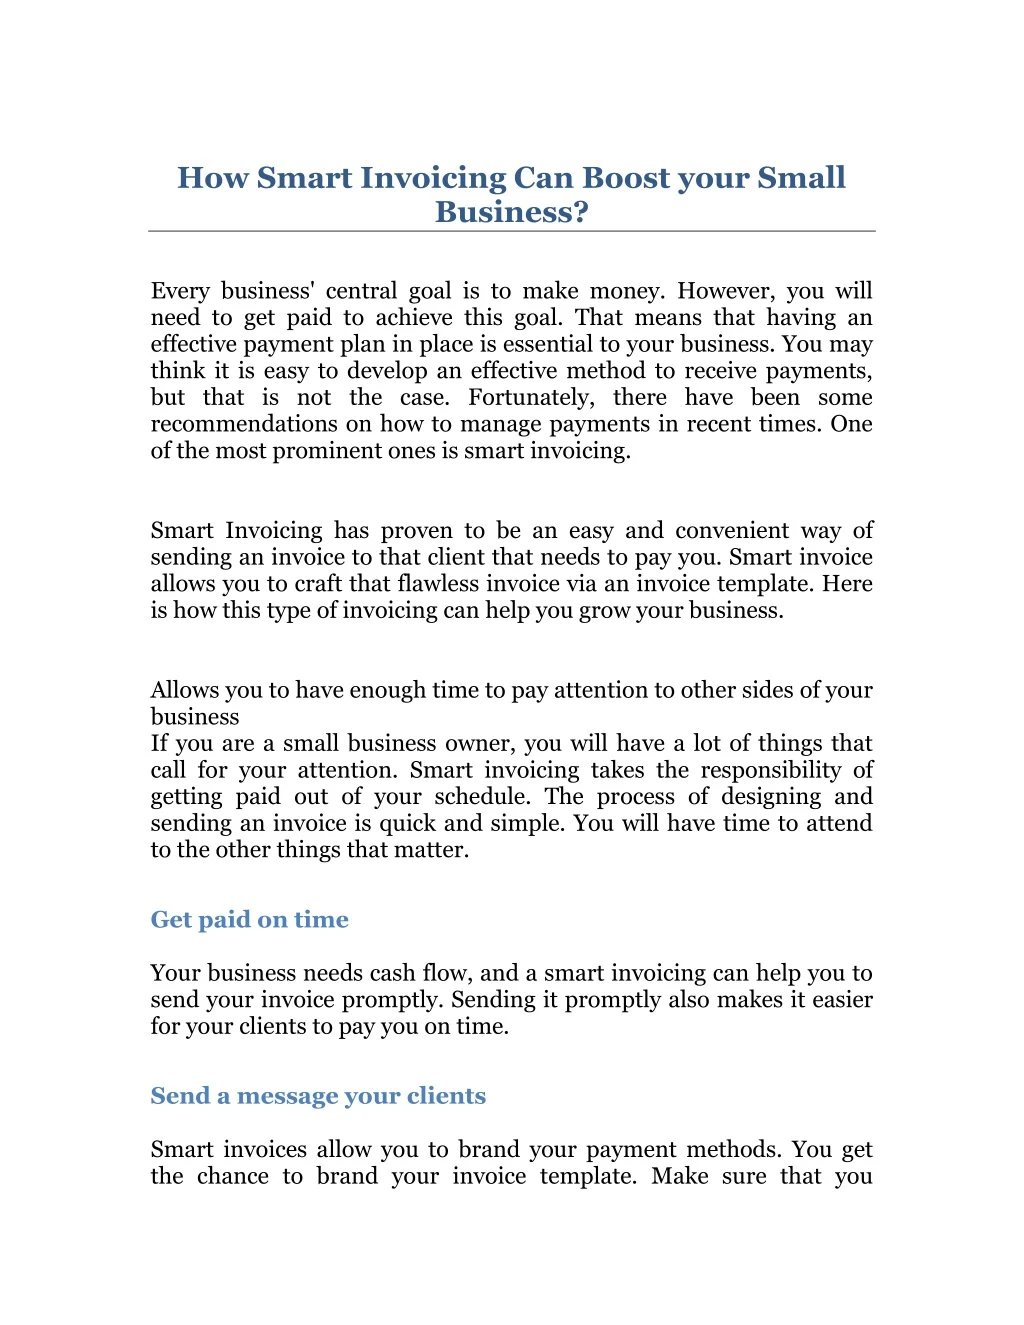 how smart invoicing can boost your small business